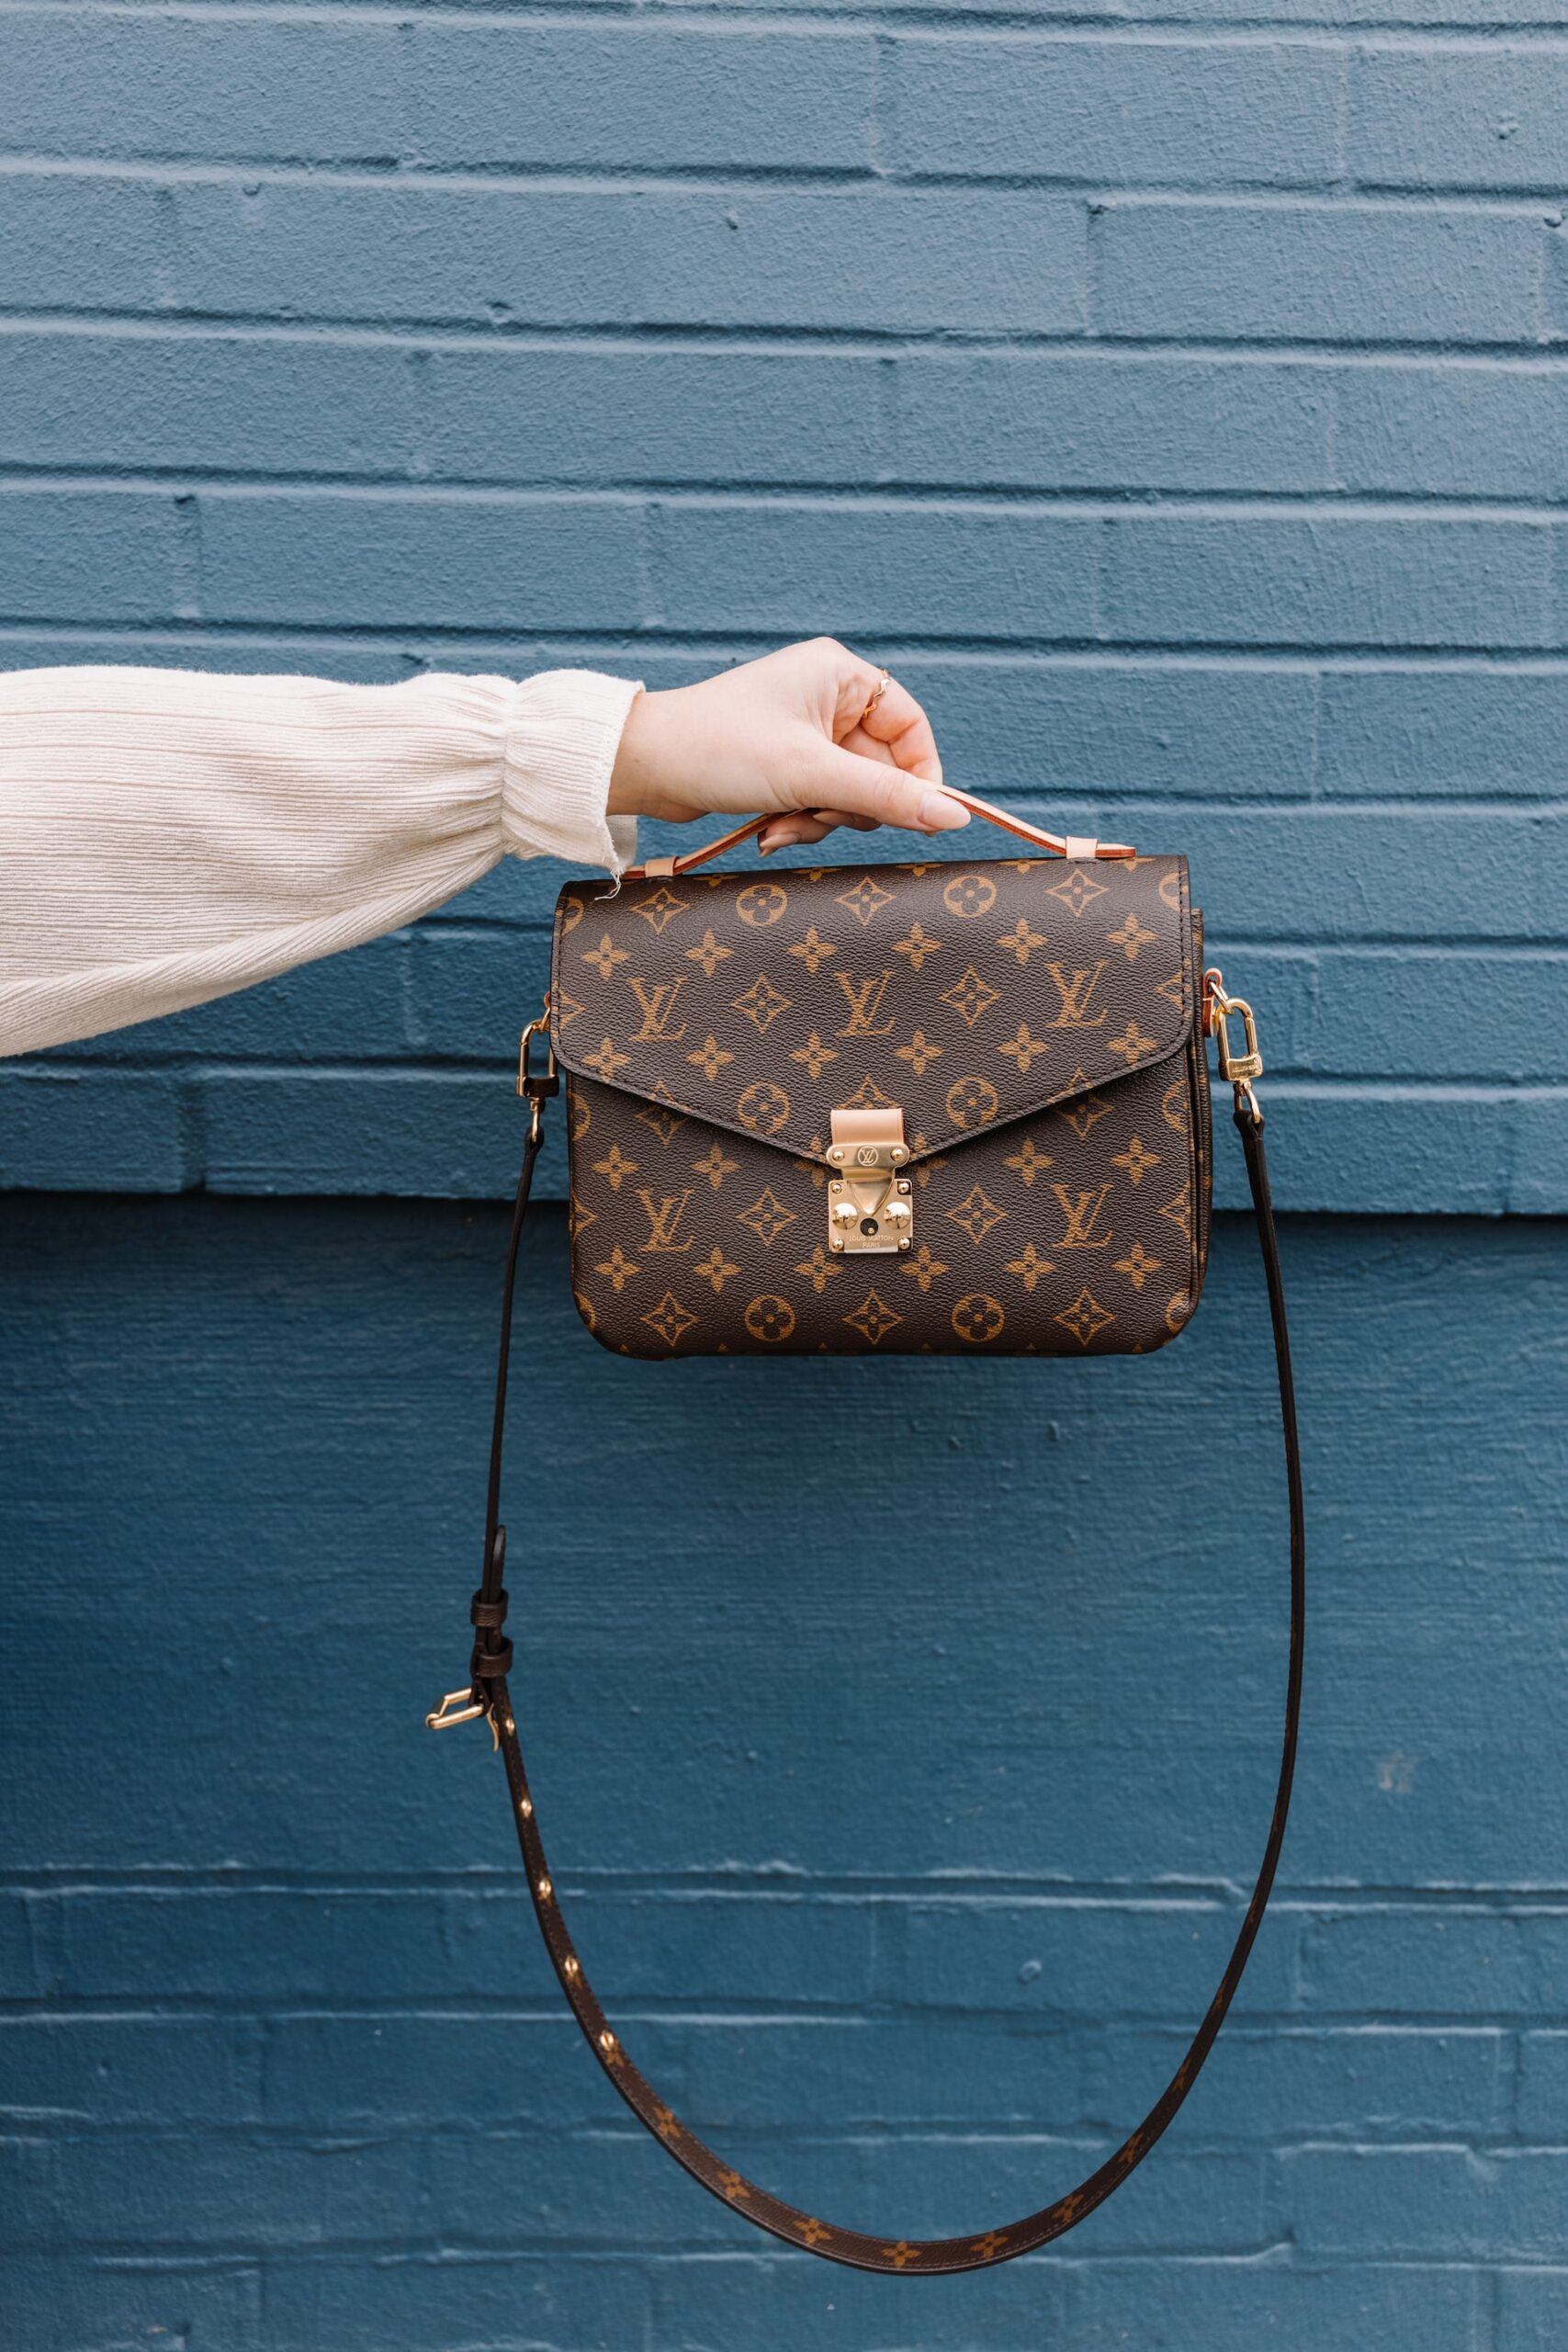 Why are Louis Vuitton's Leather Satchels Iconic and Timeless?